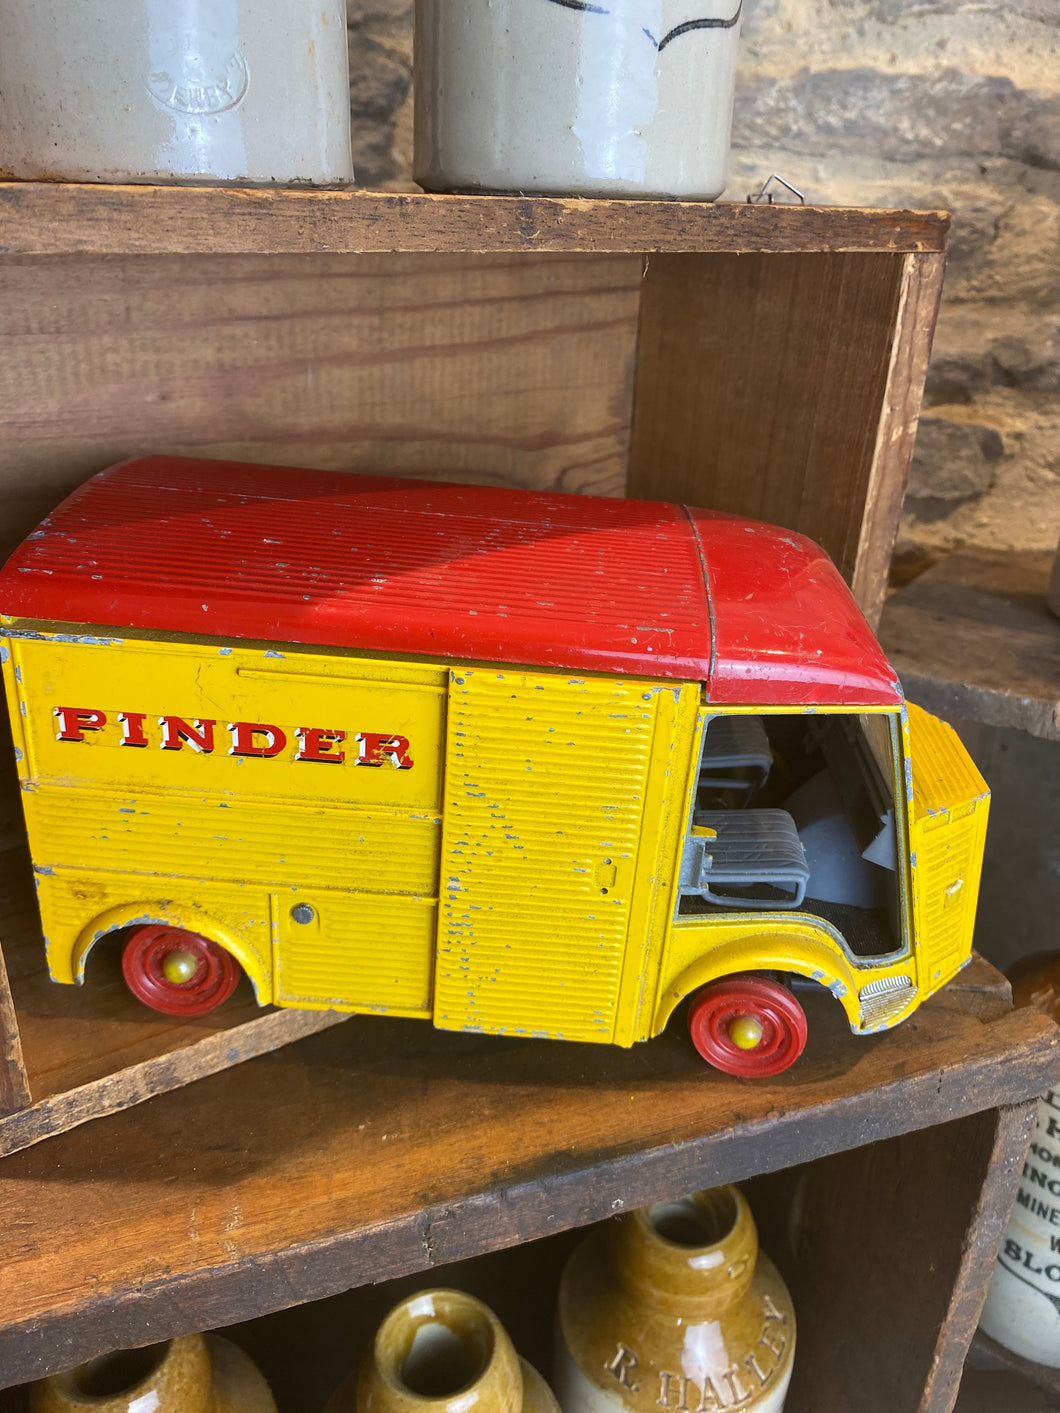 Toy Citreon HY 1962 French van